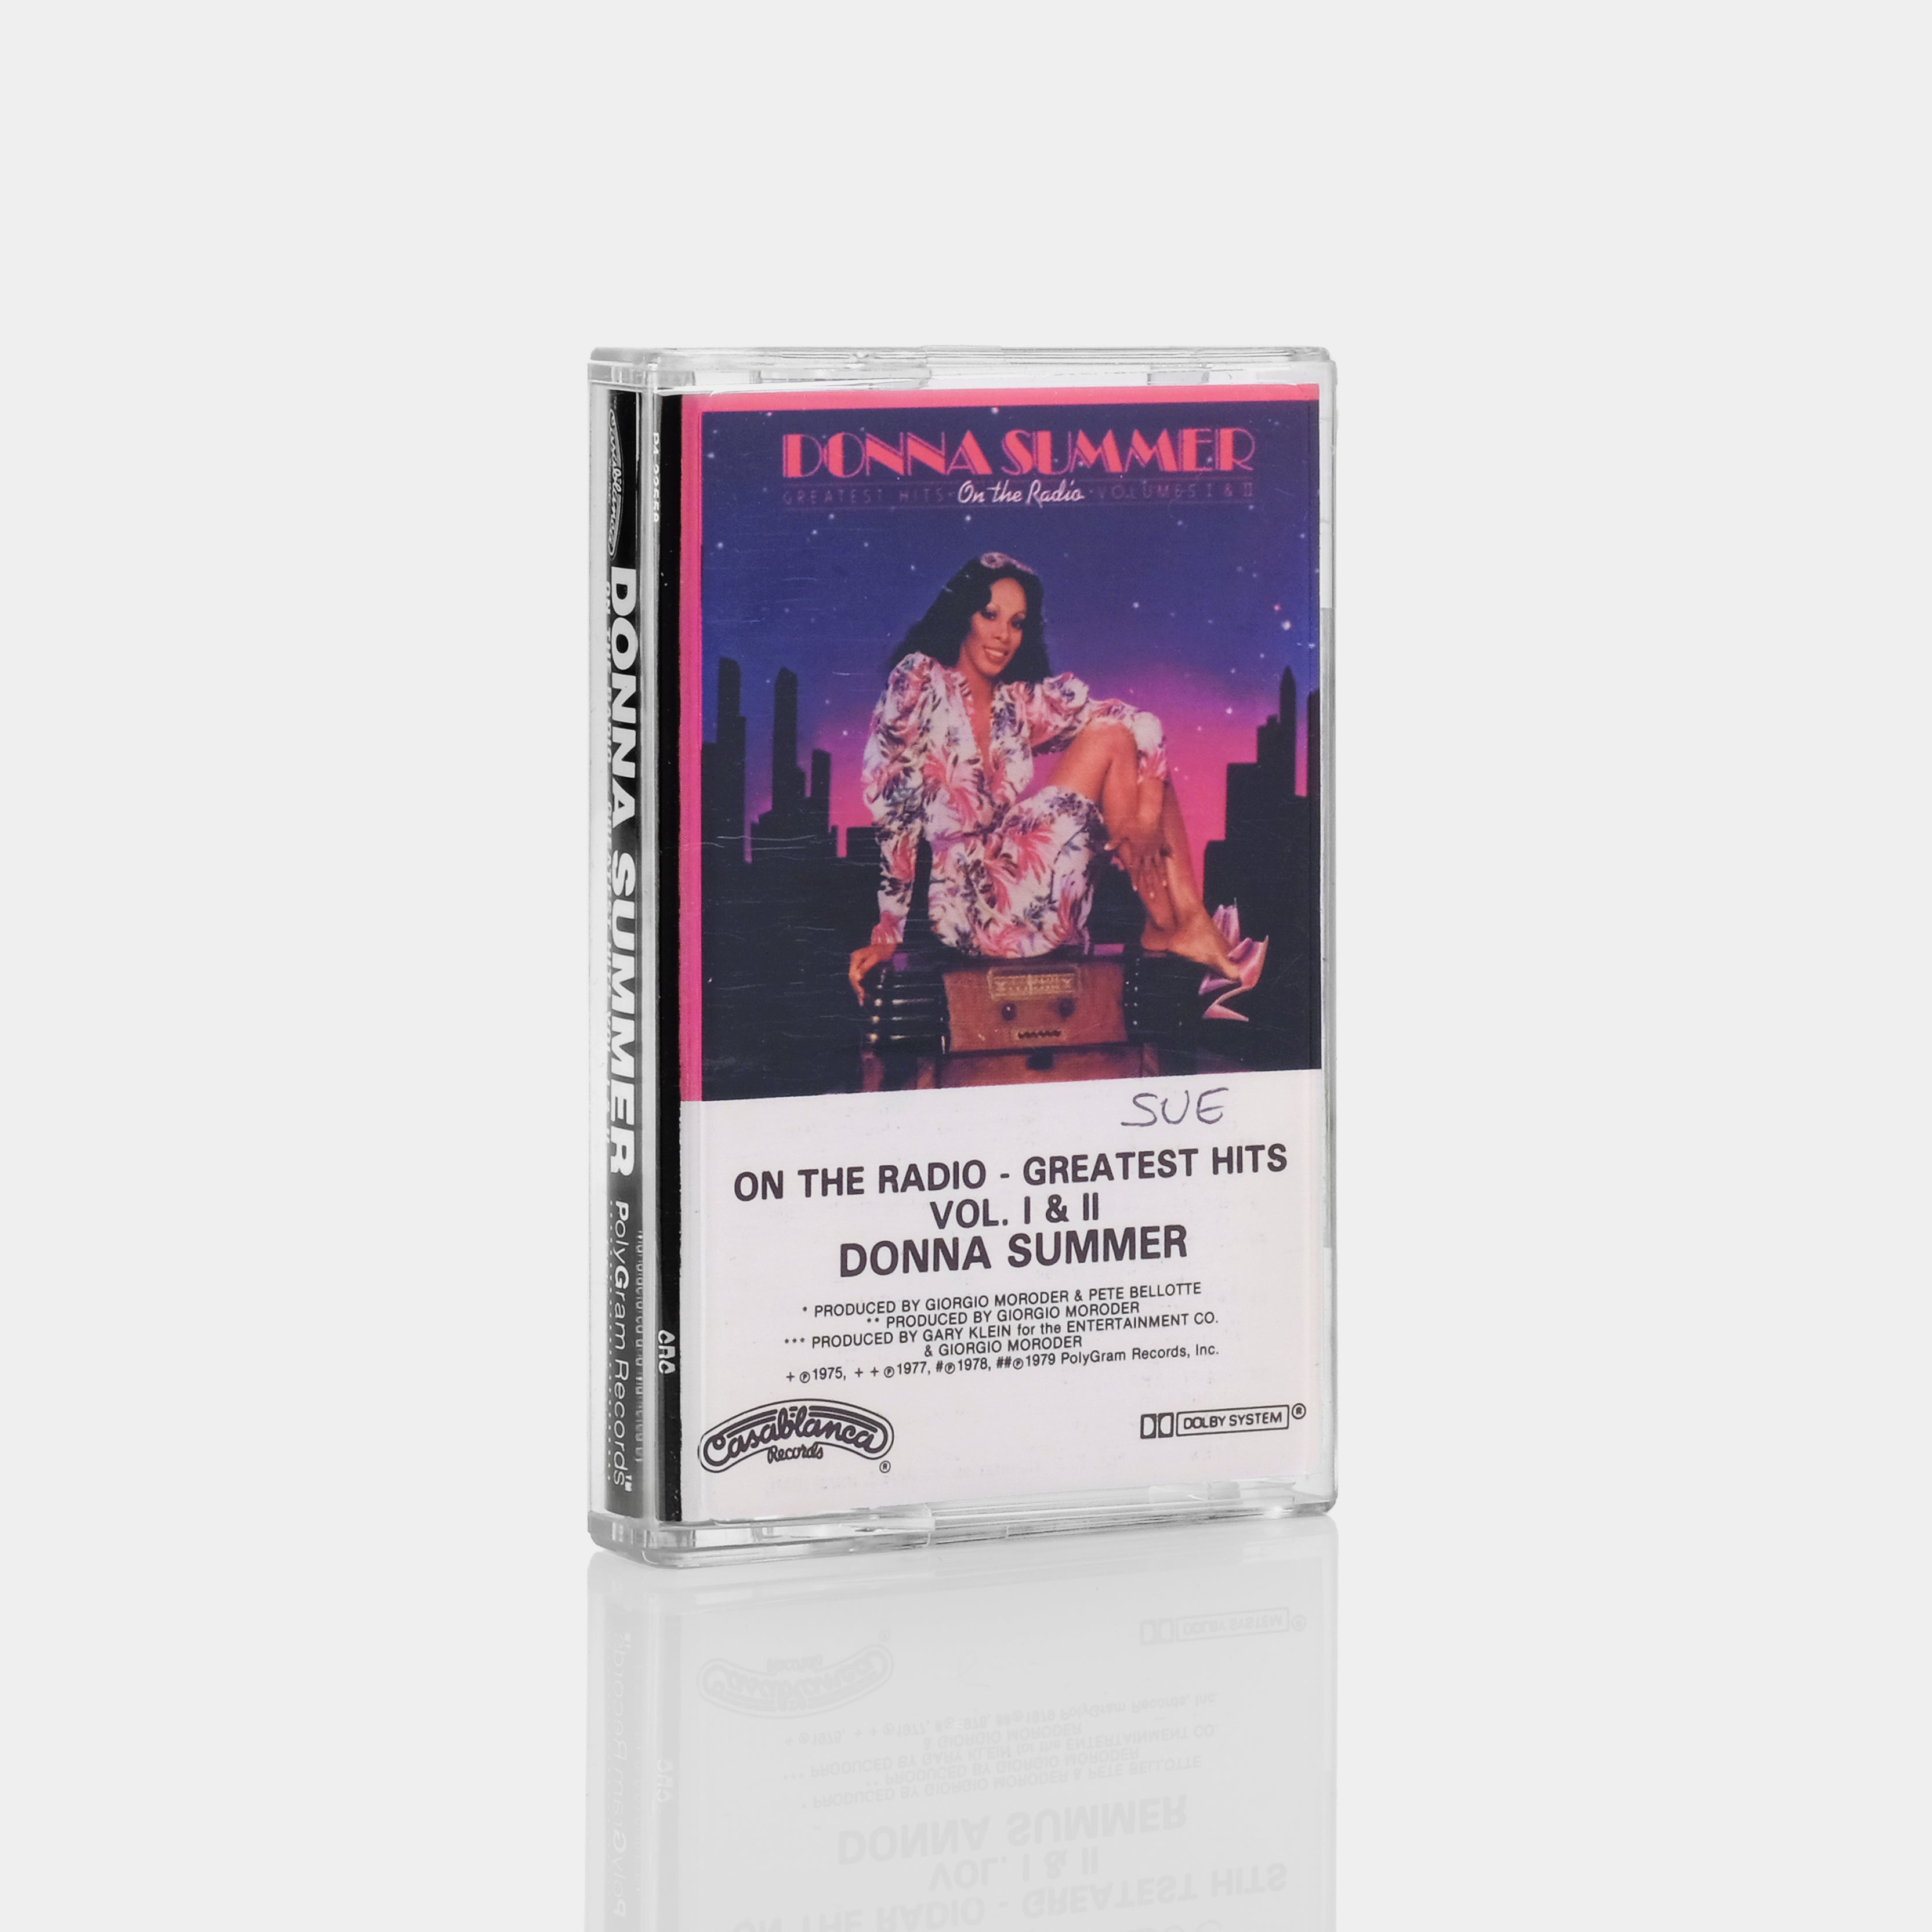 Radio:　I　Cassette　II　Greatest　Vol.　Hits　The　Donna　On　Summer　Tape